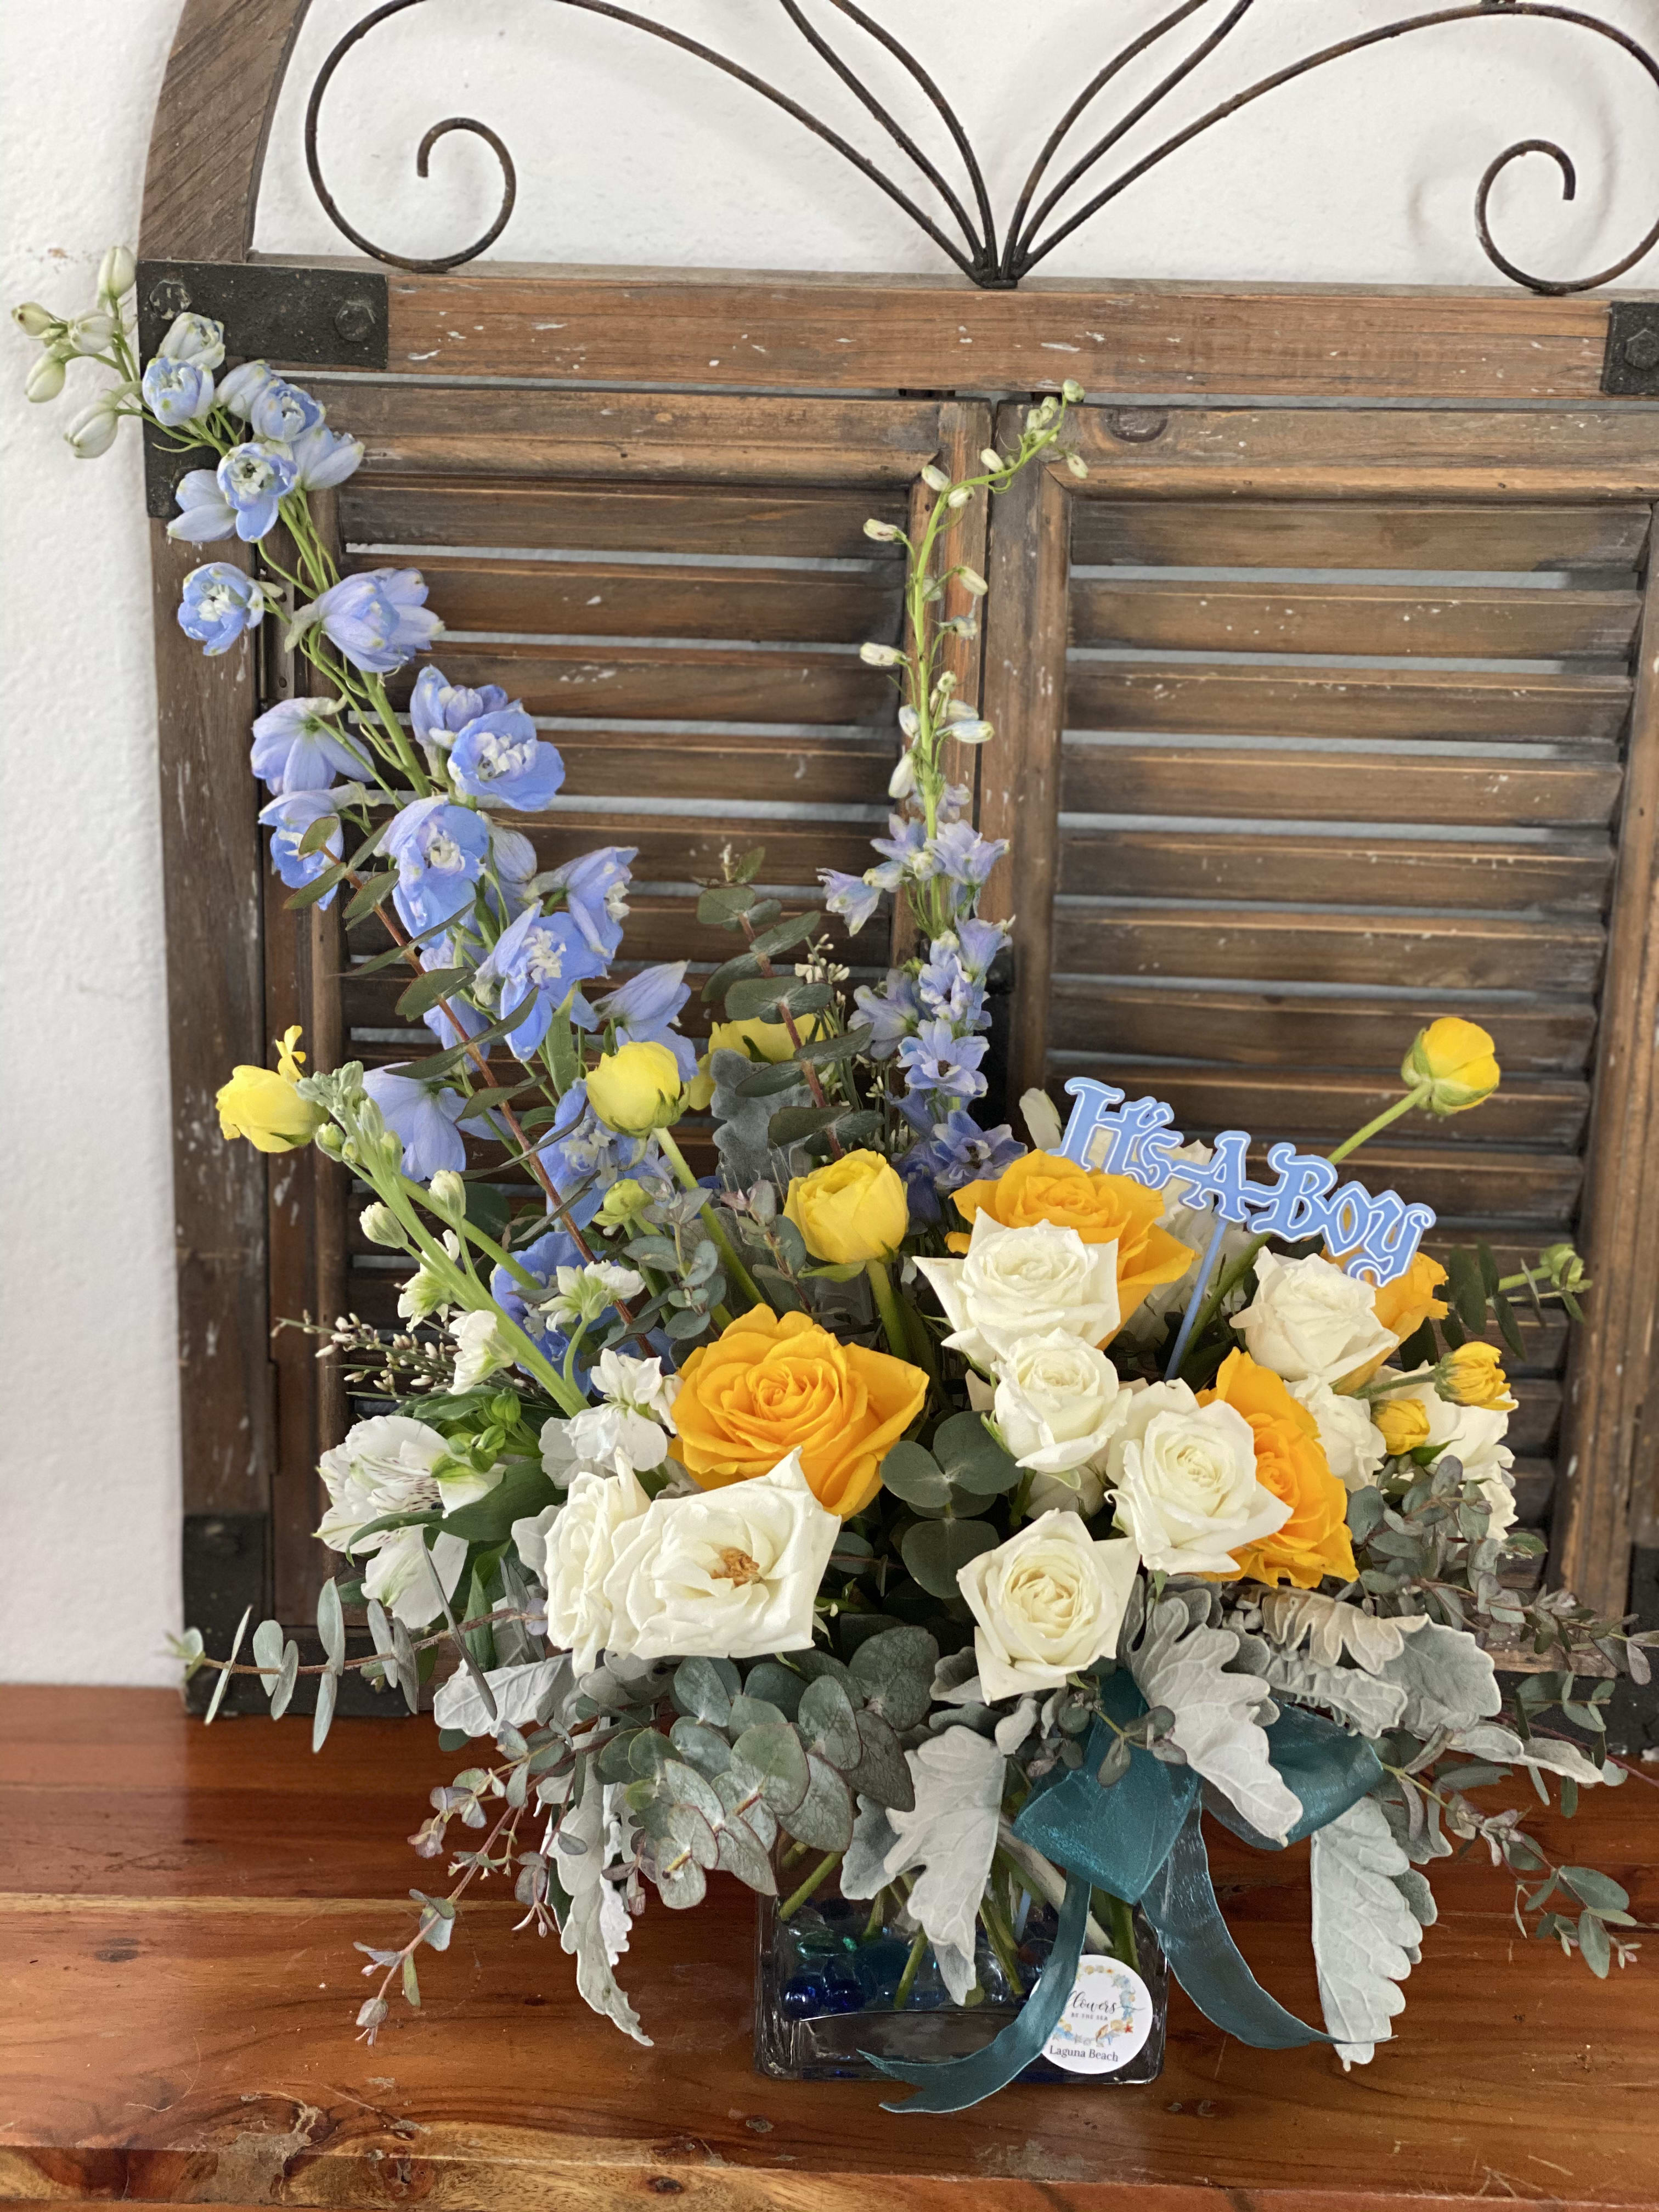 It's Boy  - So cute baby blue arrangement  in square clear vase, in blues and yellow fresh flowers.